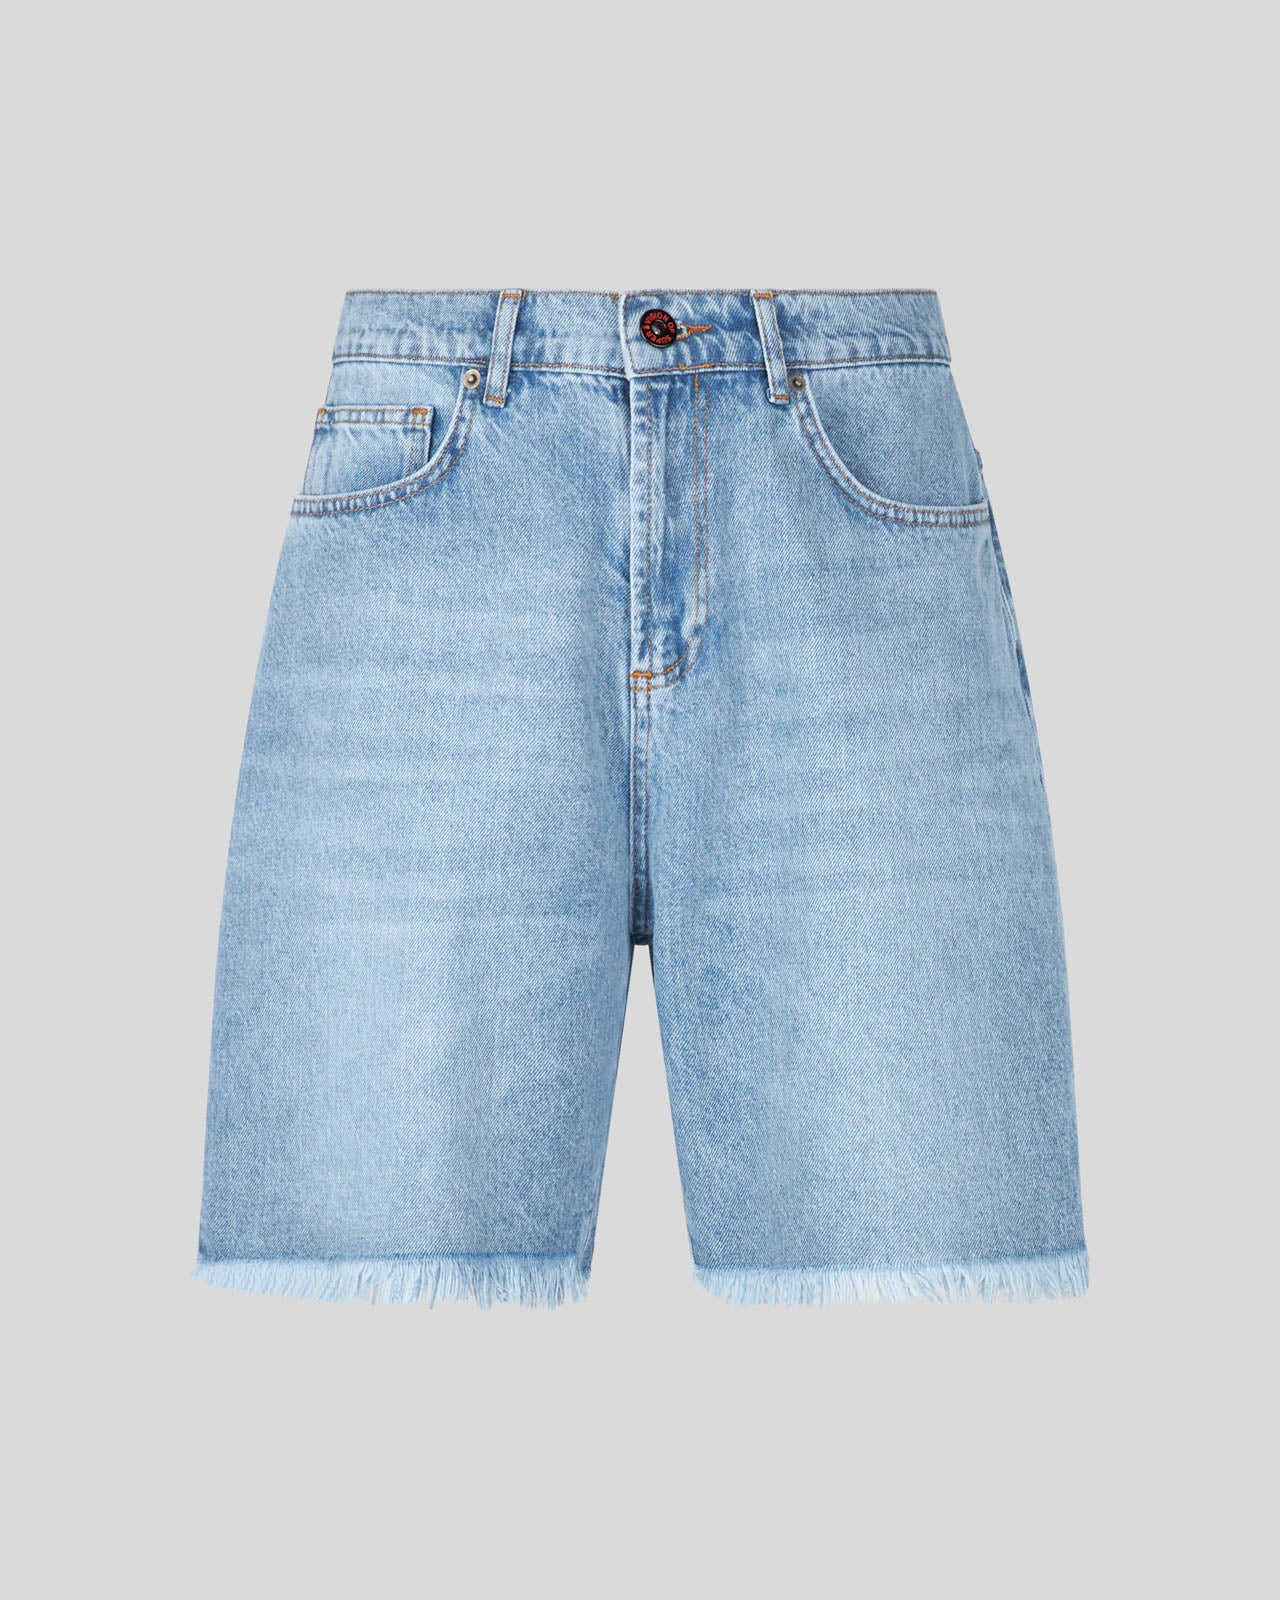 BLUE DENIM SHORTS WITH PRINTED LOGO AND FLAMES PATCH